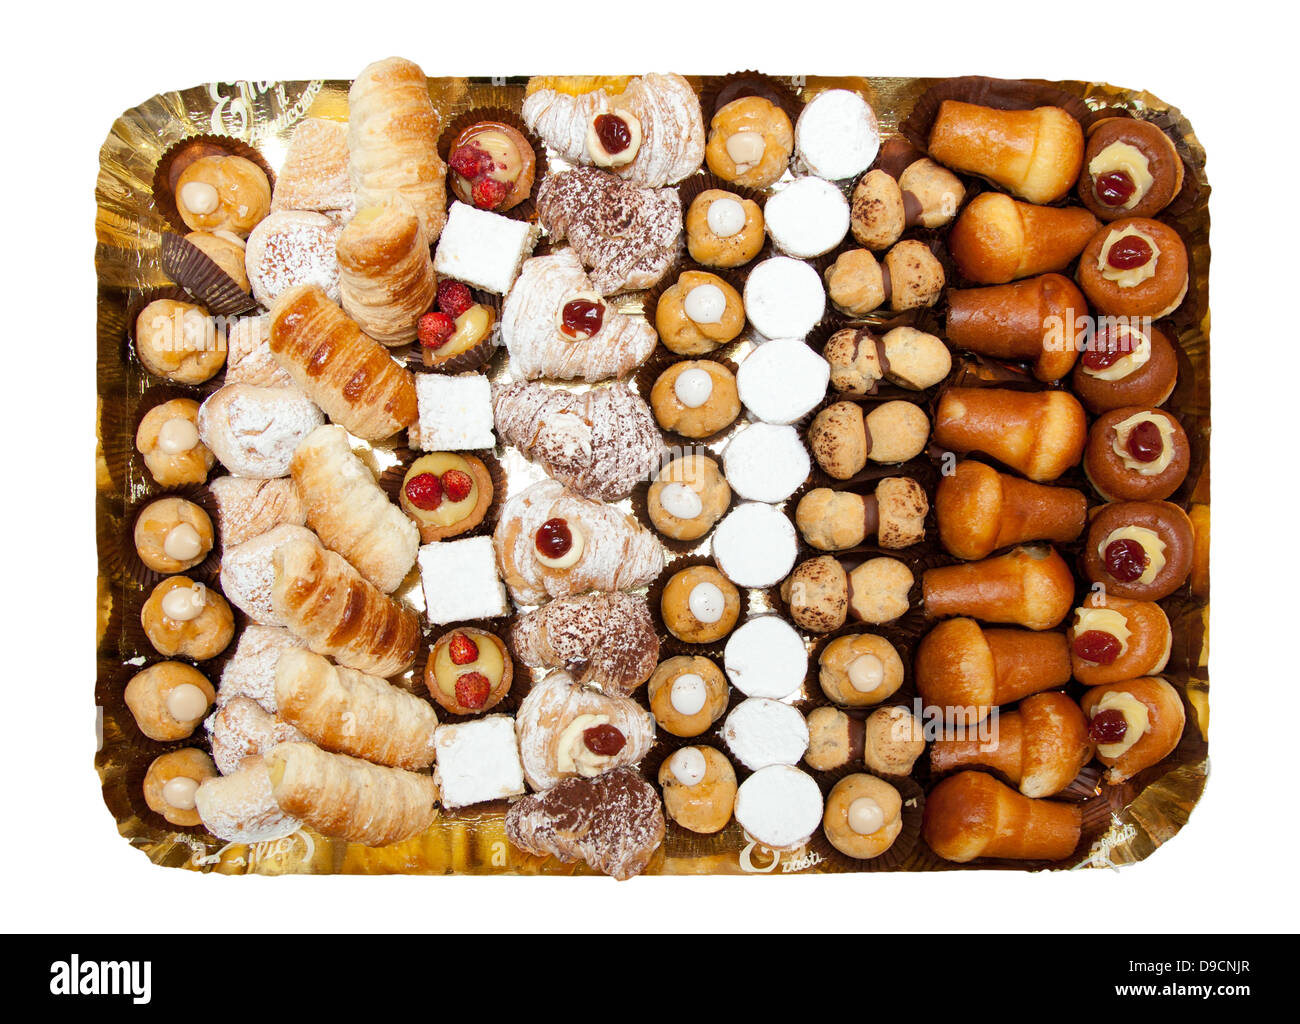 Tray of mixed patisserie on white background Stock Photo